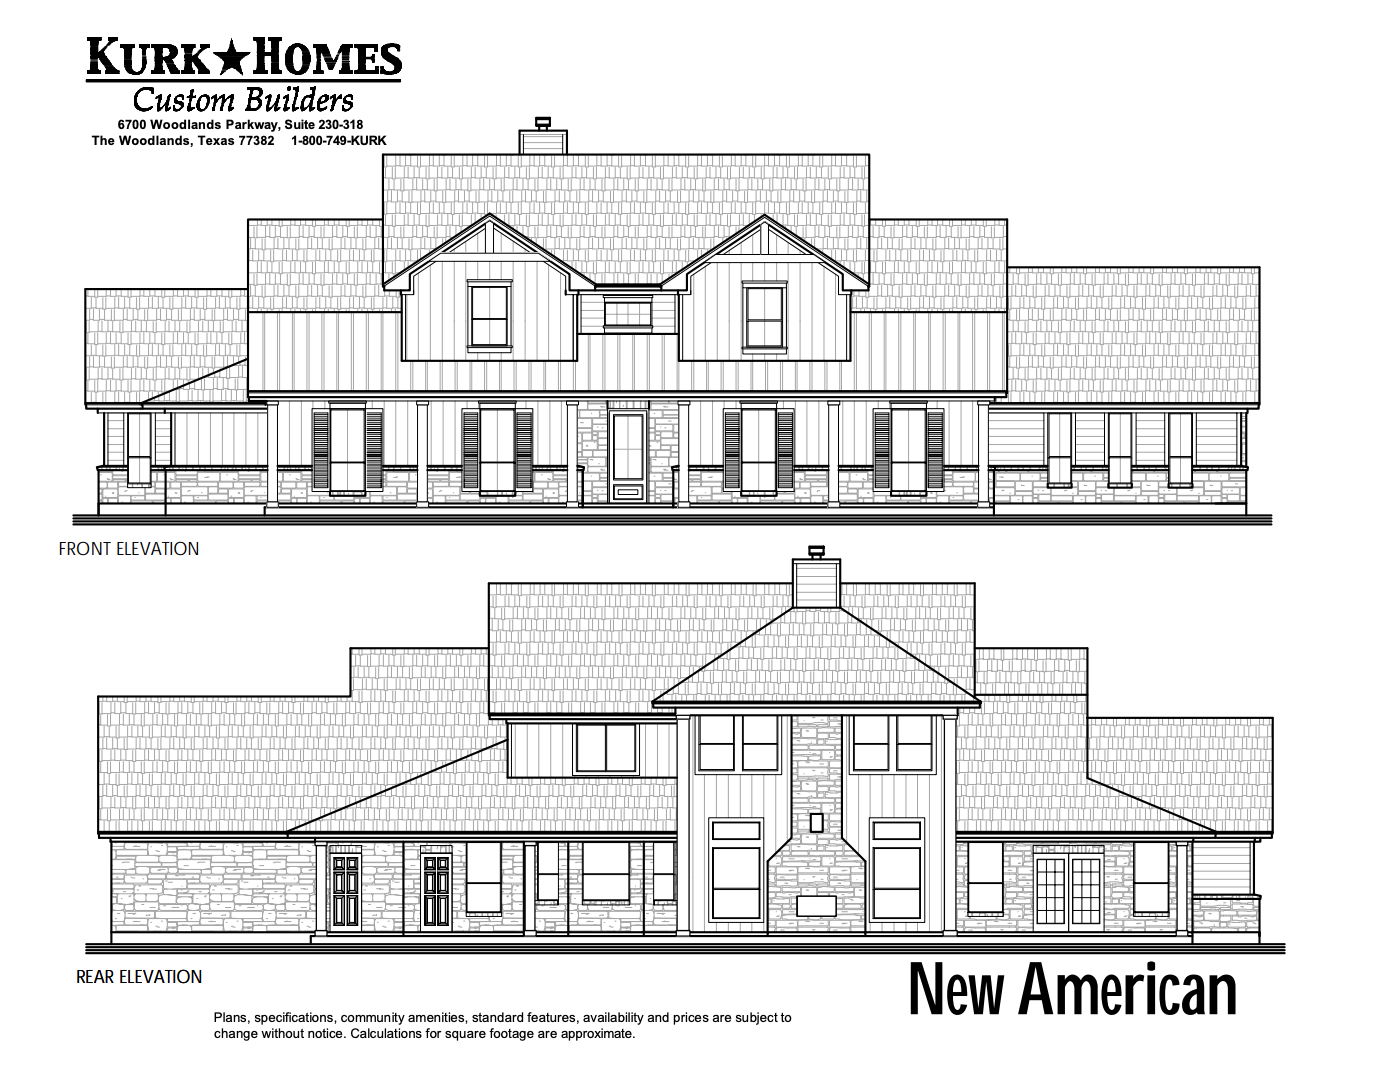 The New American - Exterior Elevation